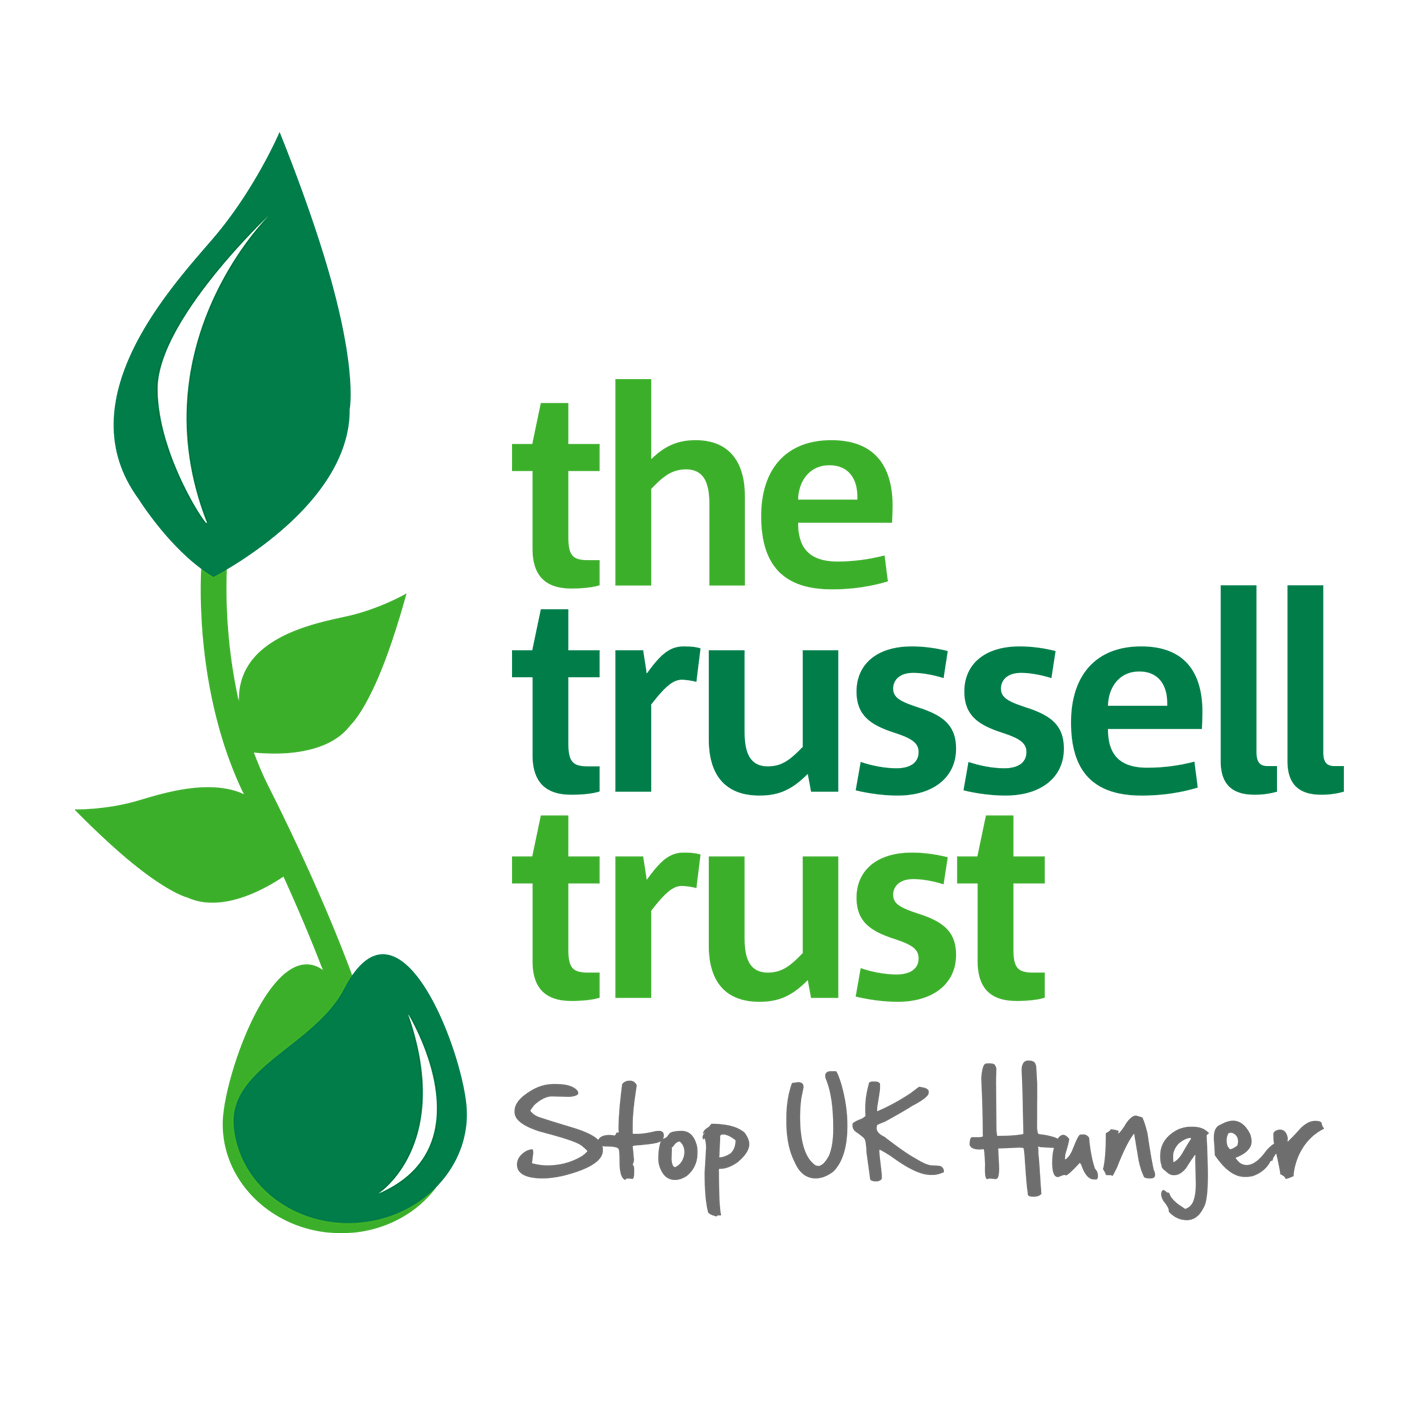 We support @trusselltrust #foodbanks & local #communities through our #SocialEnterprise activities - #charity shops and #upcycling projects.